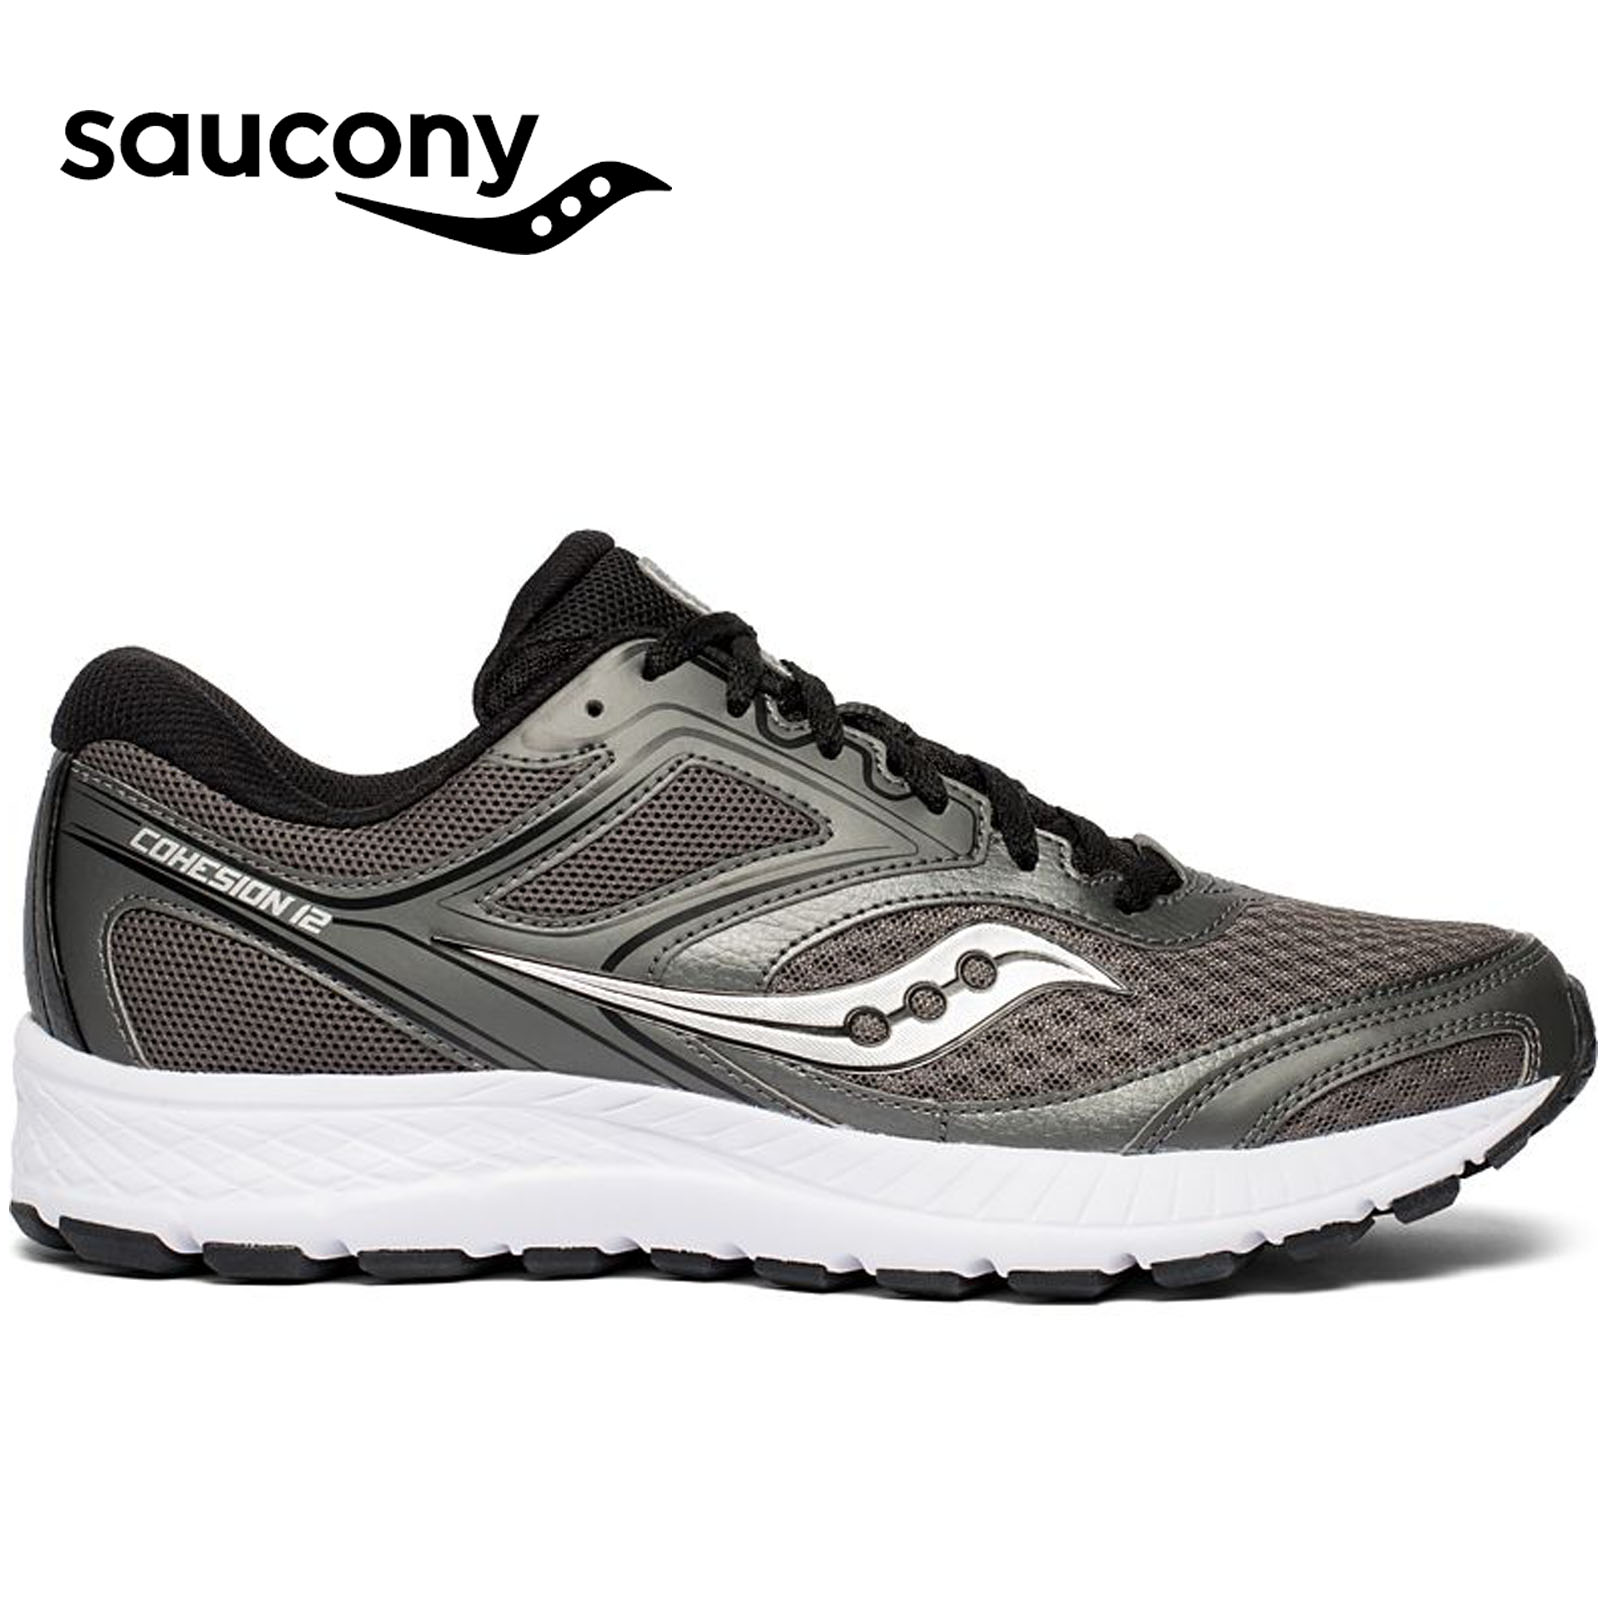 saucony shoes ethical